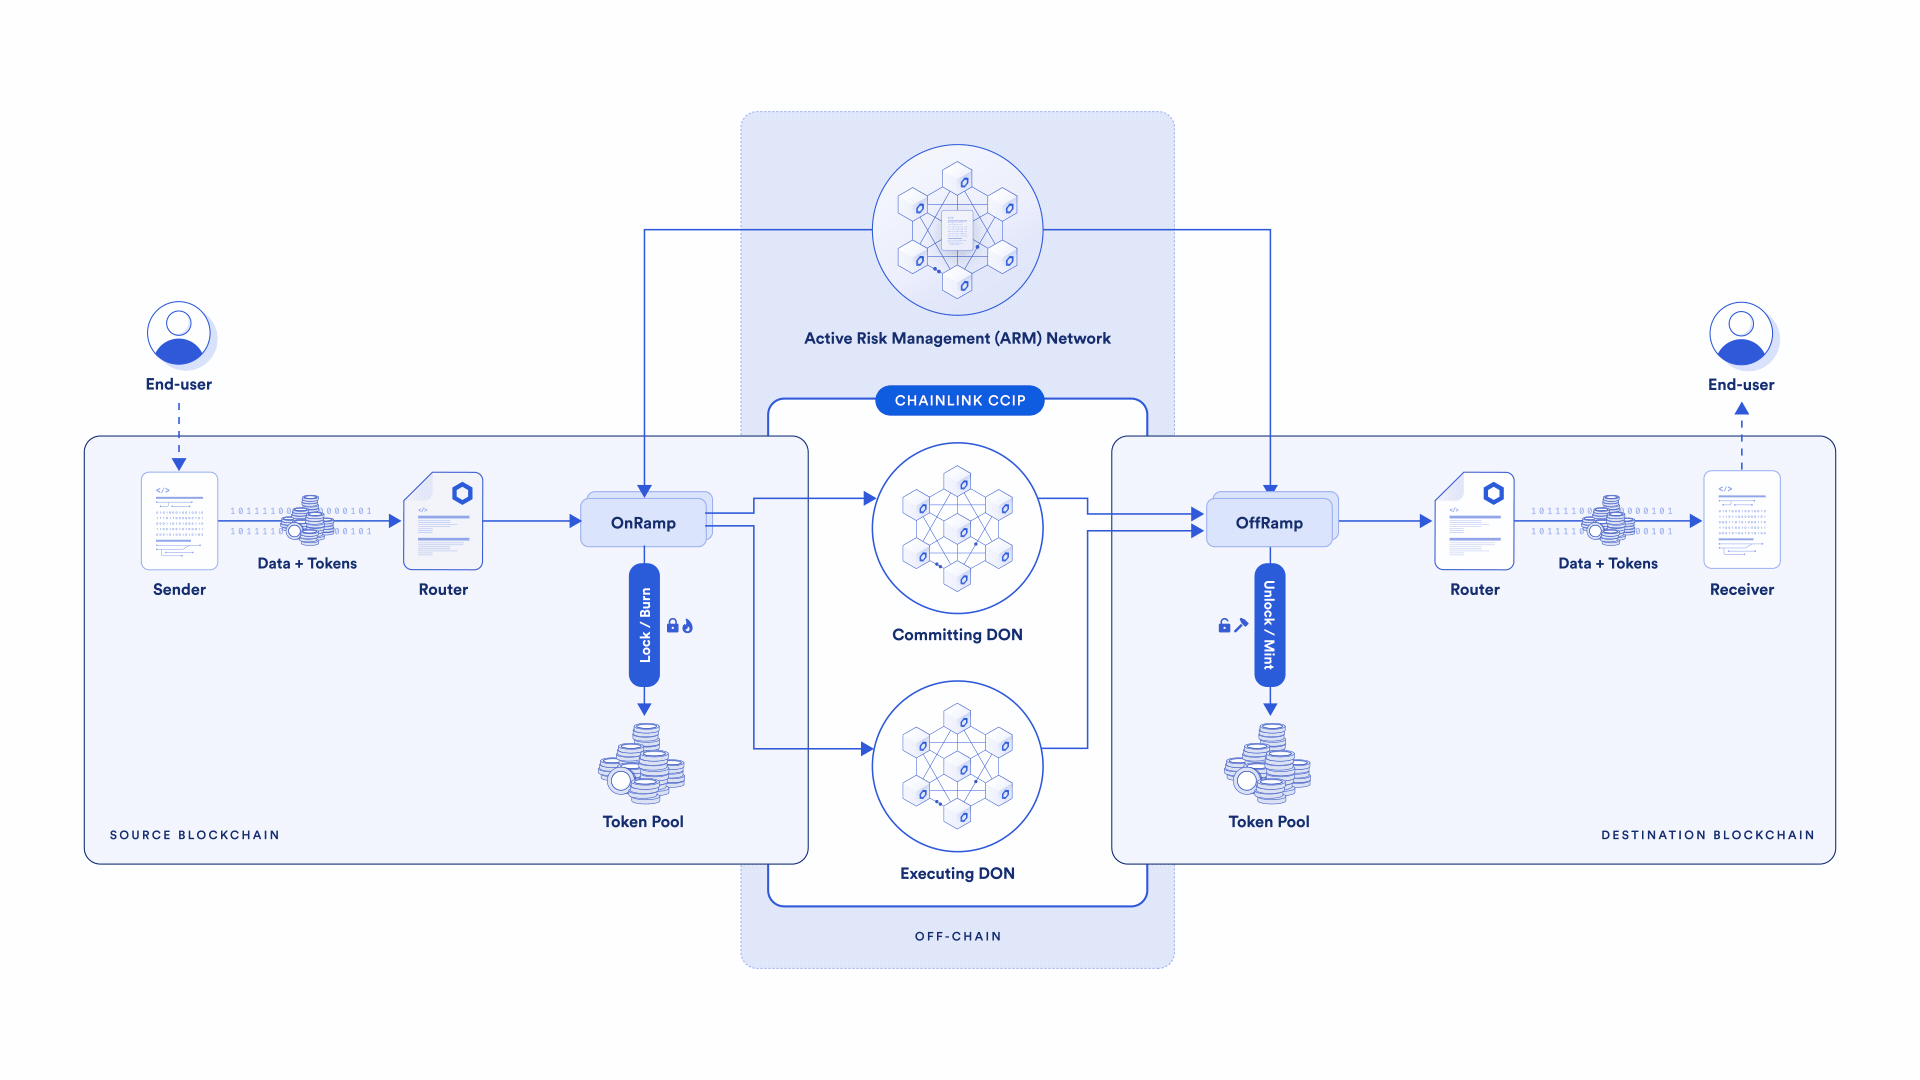  protocol cross-chain chainlink interoperability increased security offers 